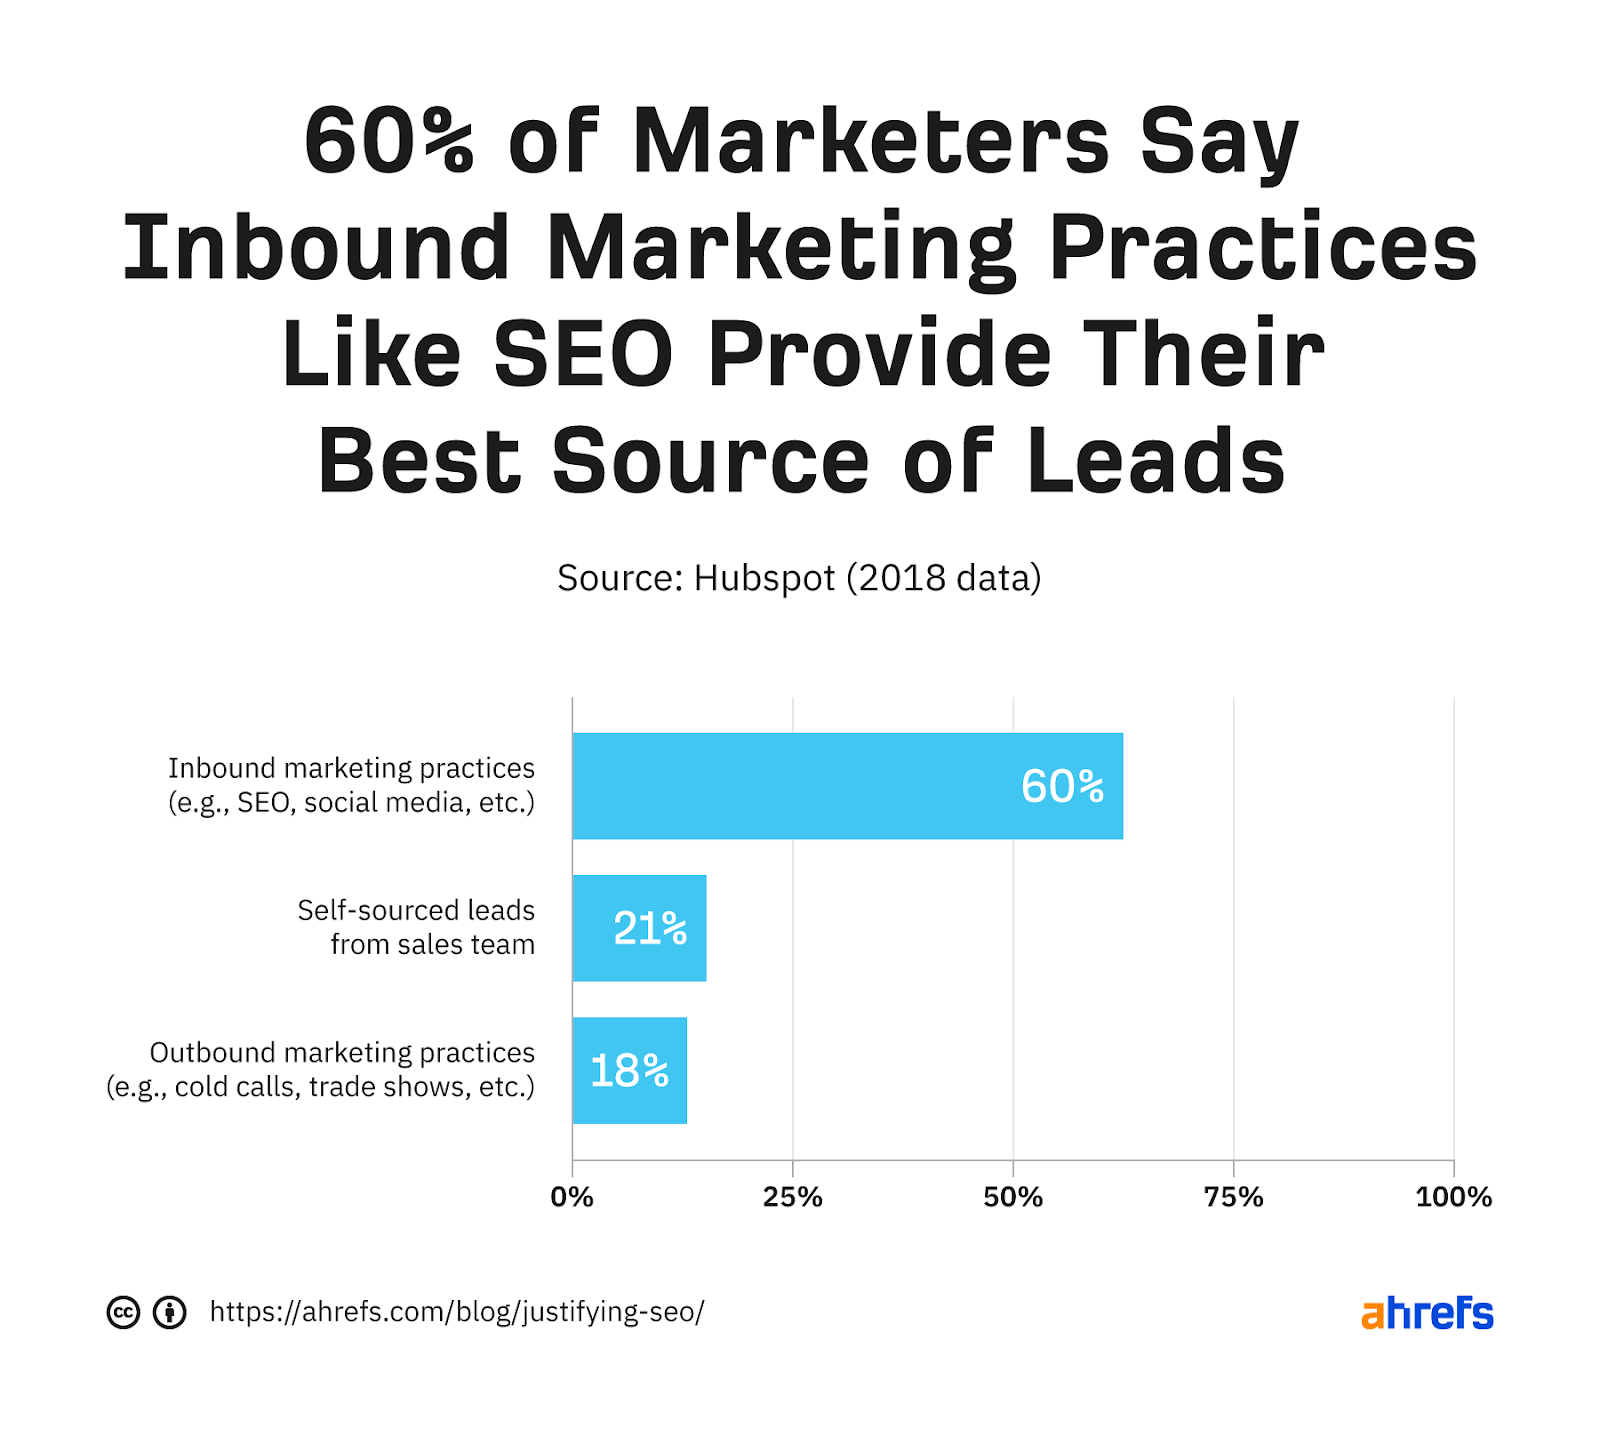 60% of marketers say inbound marketing practices, such as SEO, are their highest quality source of leads
